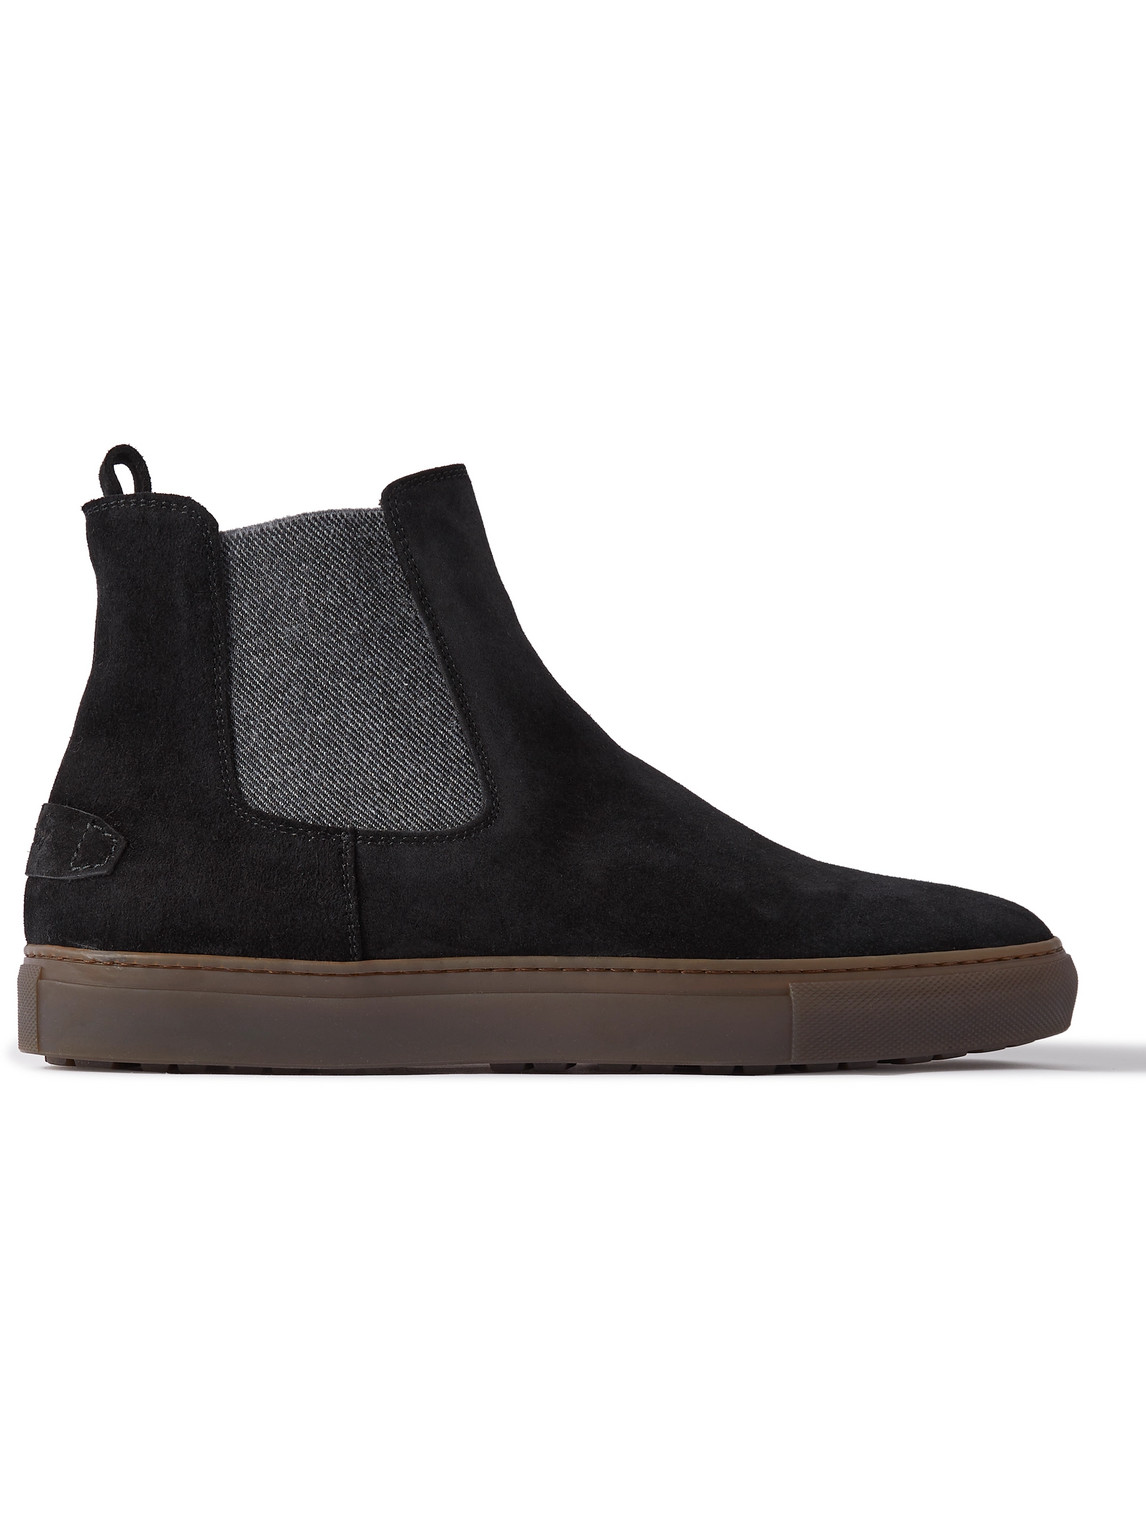 Brioni Shearling-lined Suede Chelsea Boots In Black